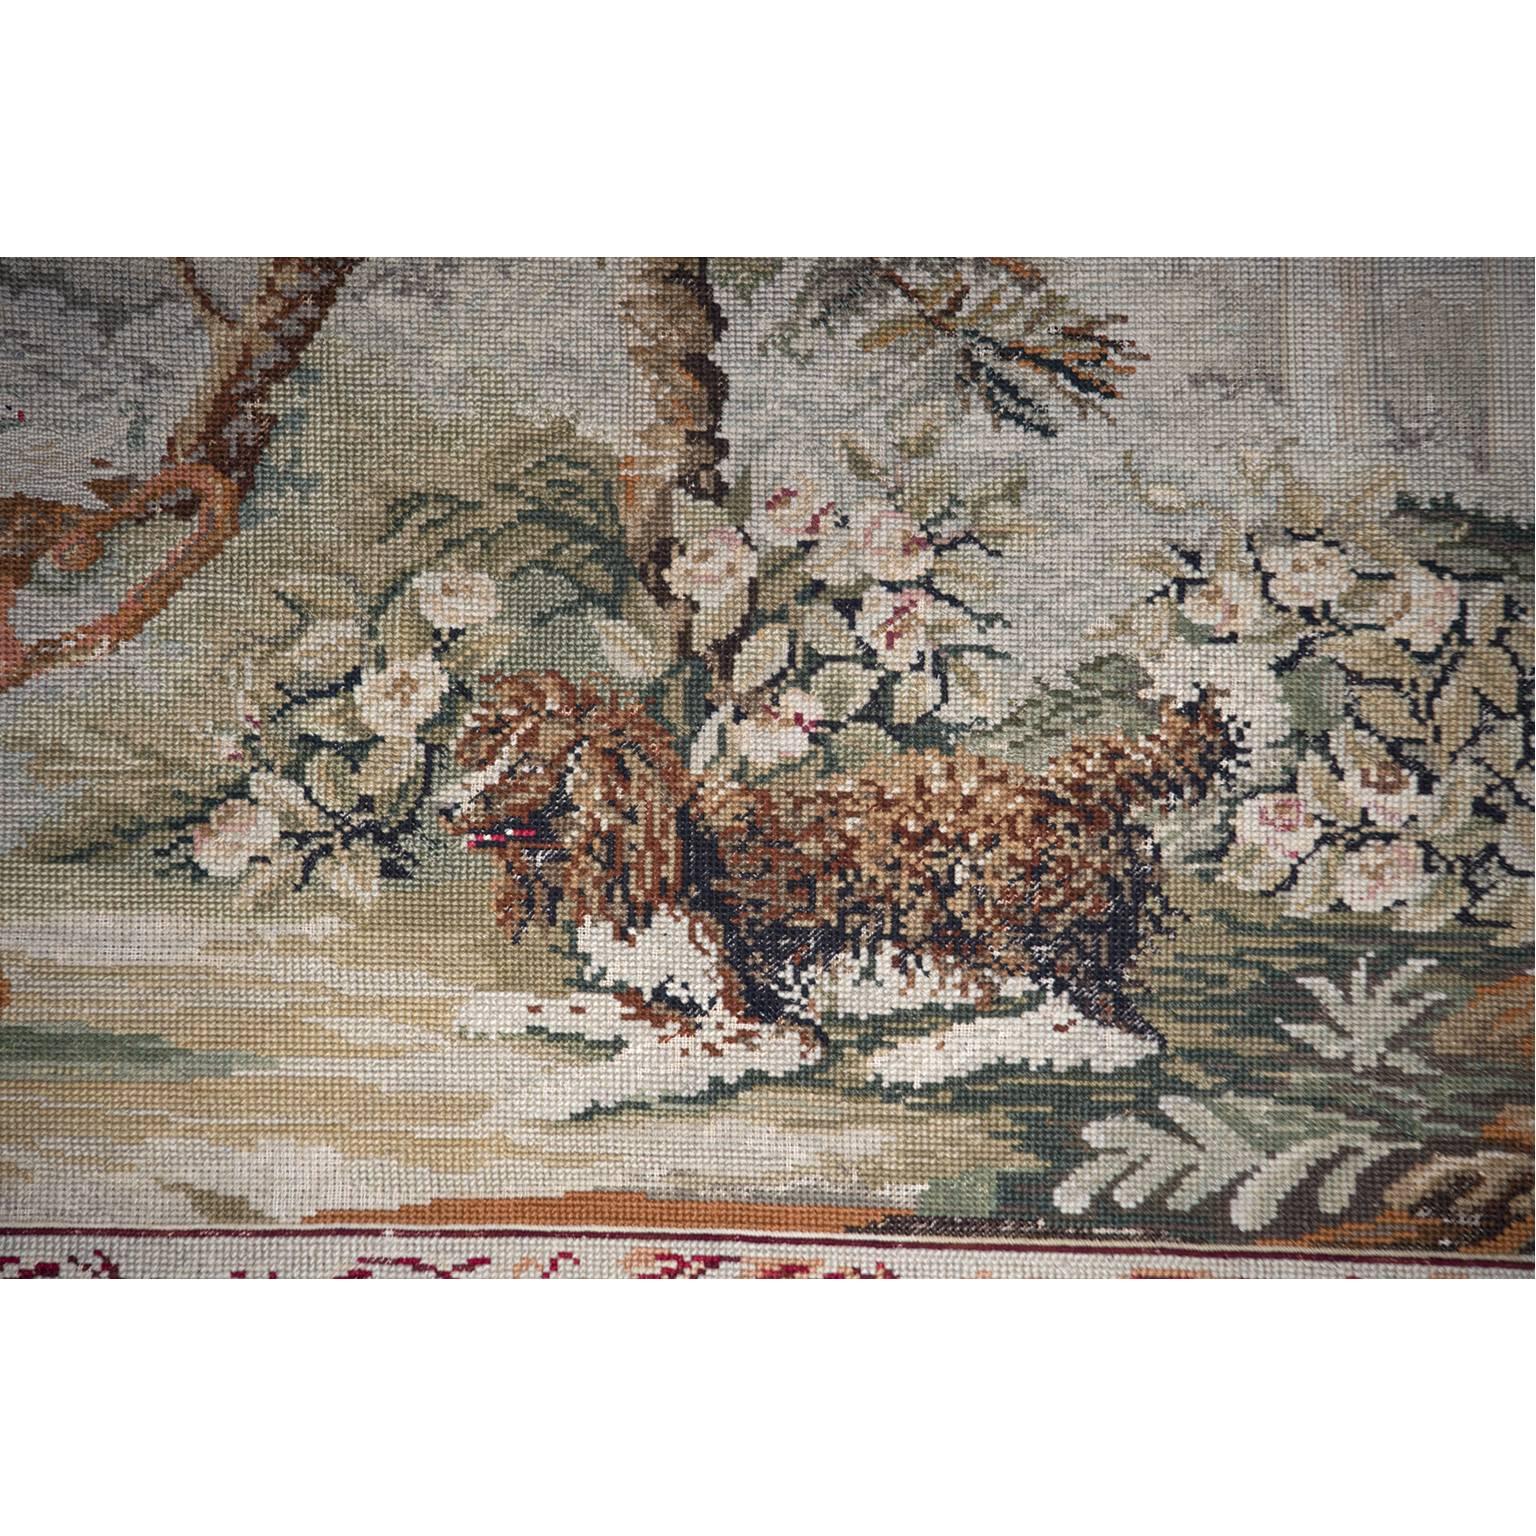 Hand-Woven 19th Century European Needlepoint Tapestry For Sale